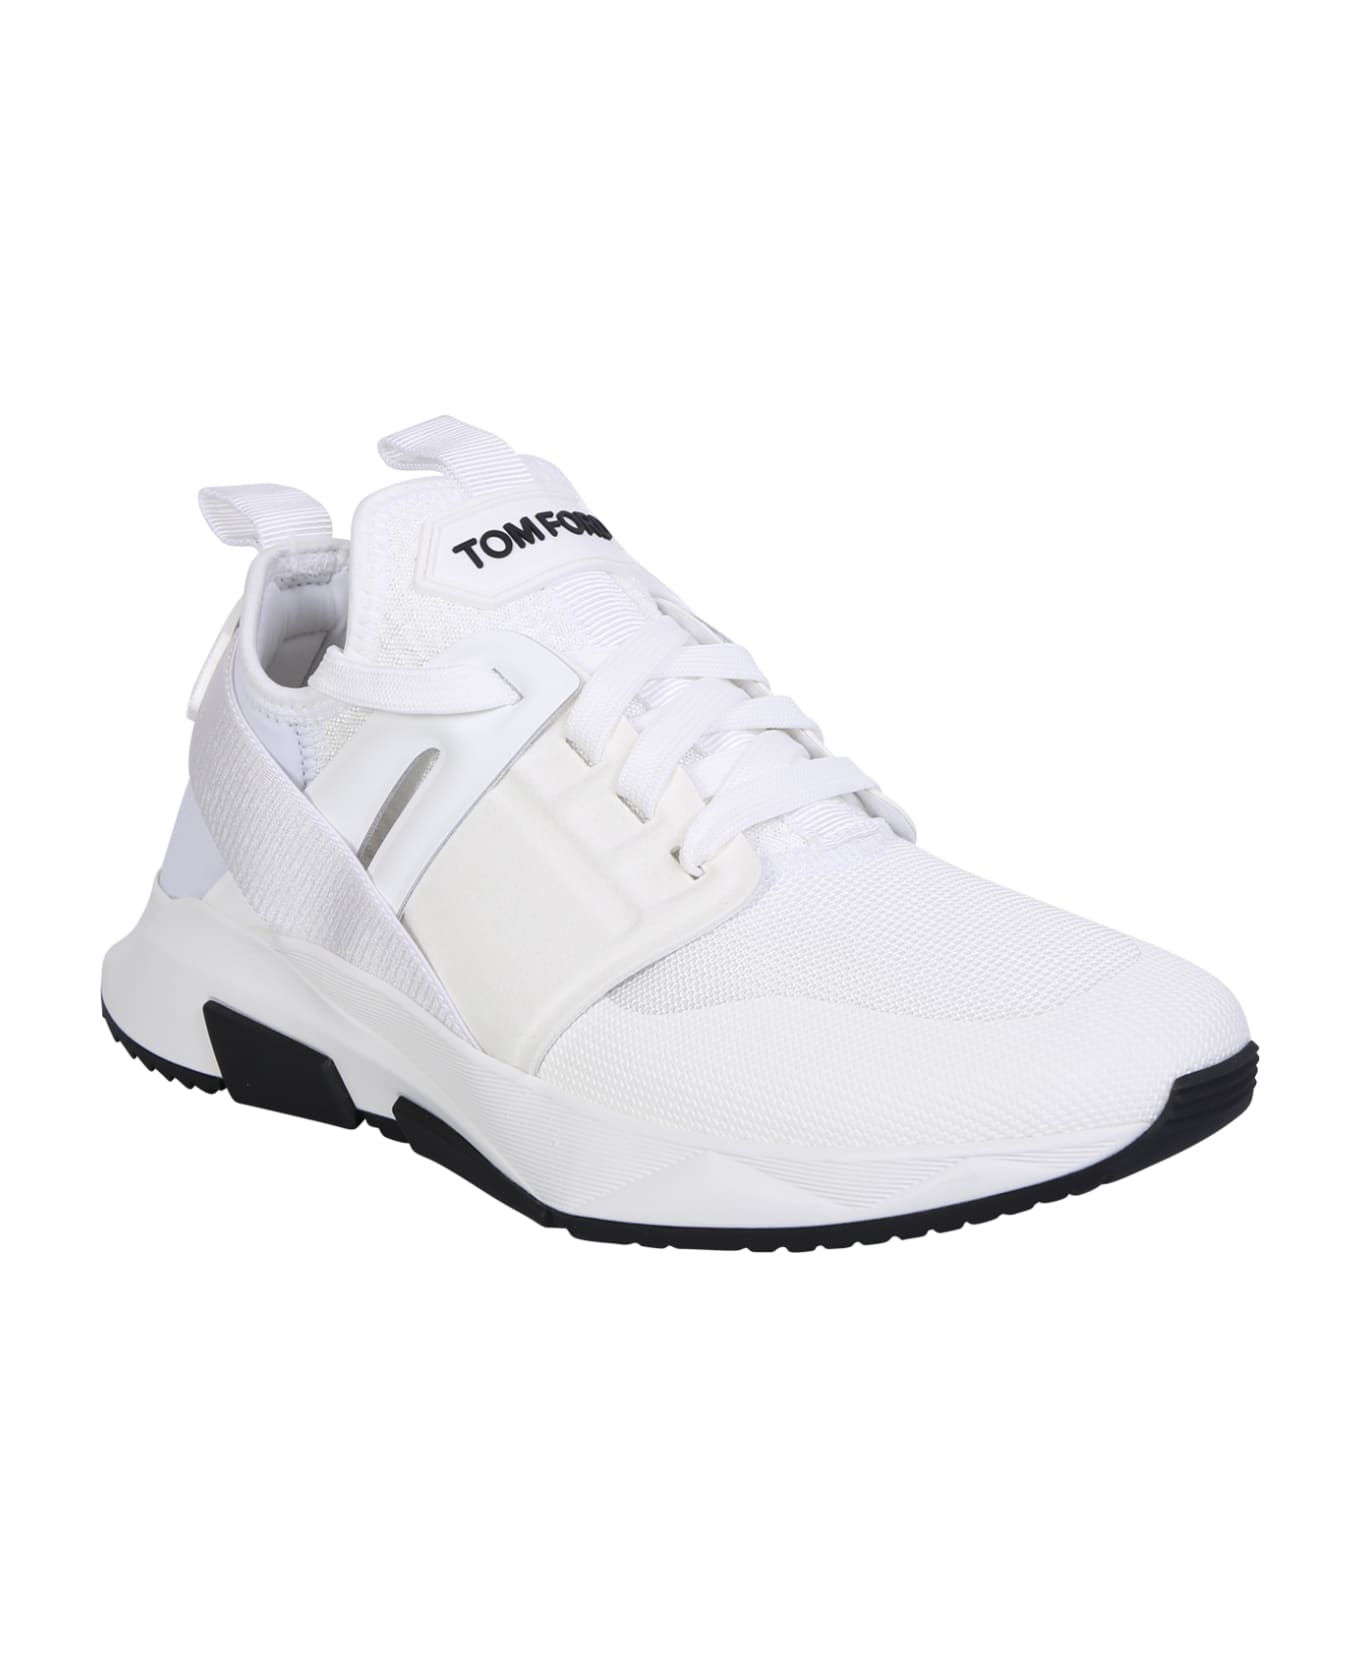 Tom Ford 'jago' Sneakers - White